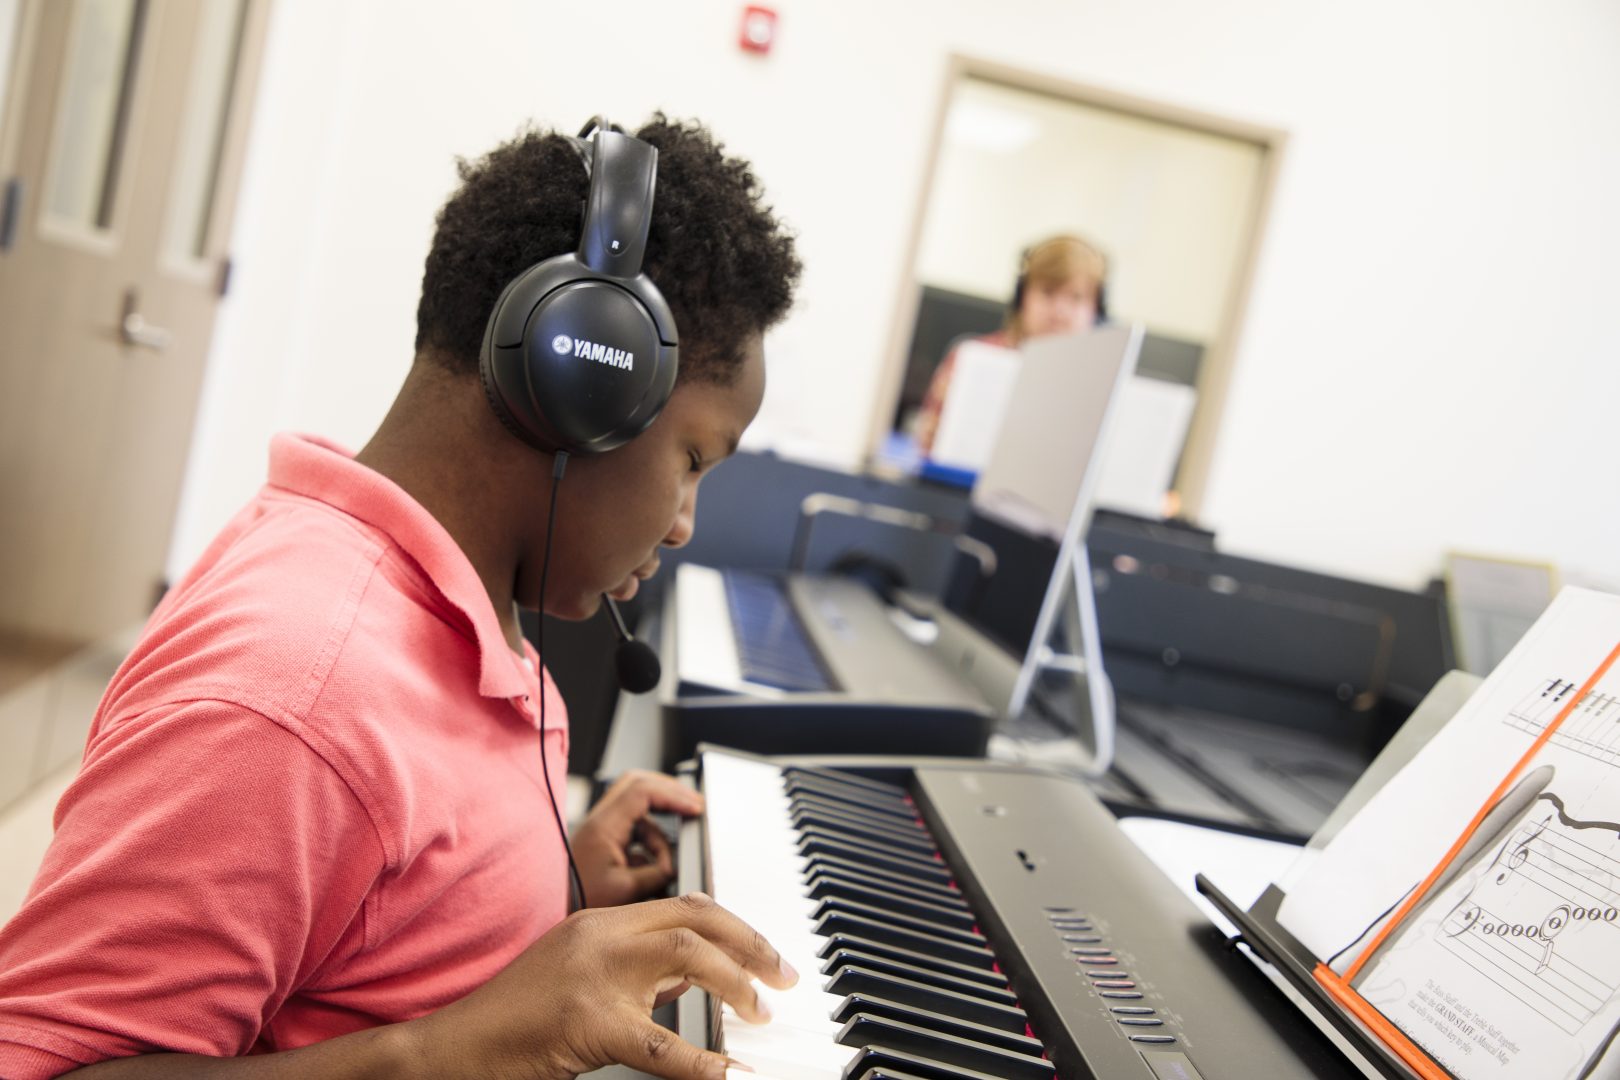 An elementary-age student playing the keyboard and wearing headphones. A teacher can be seen in the background.